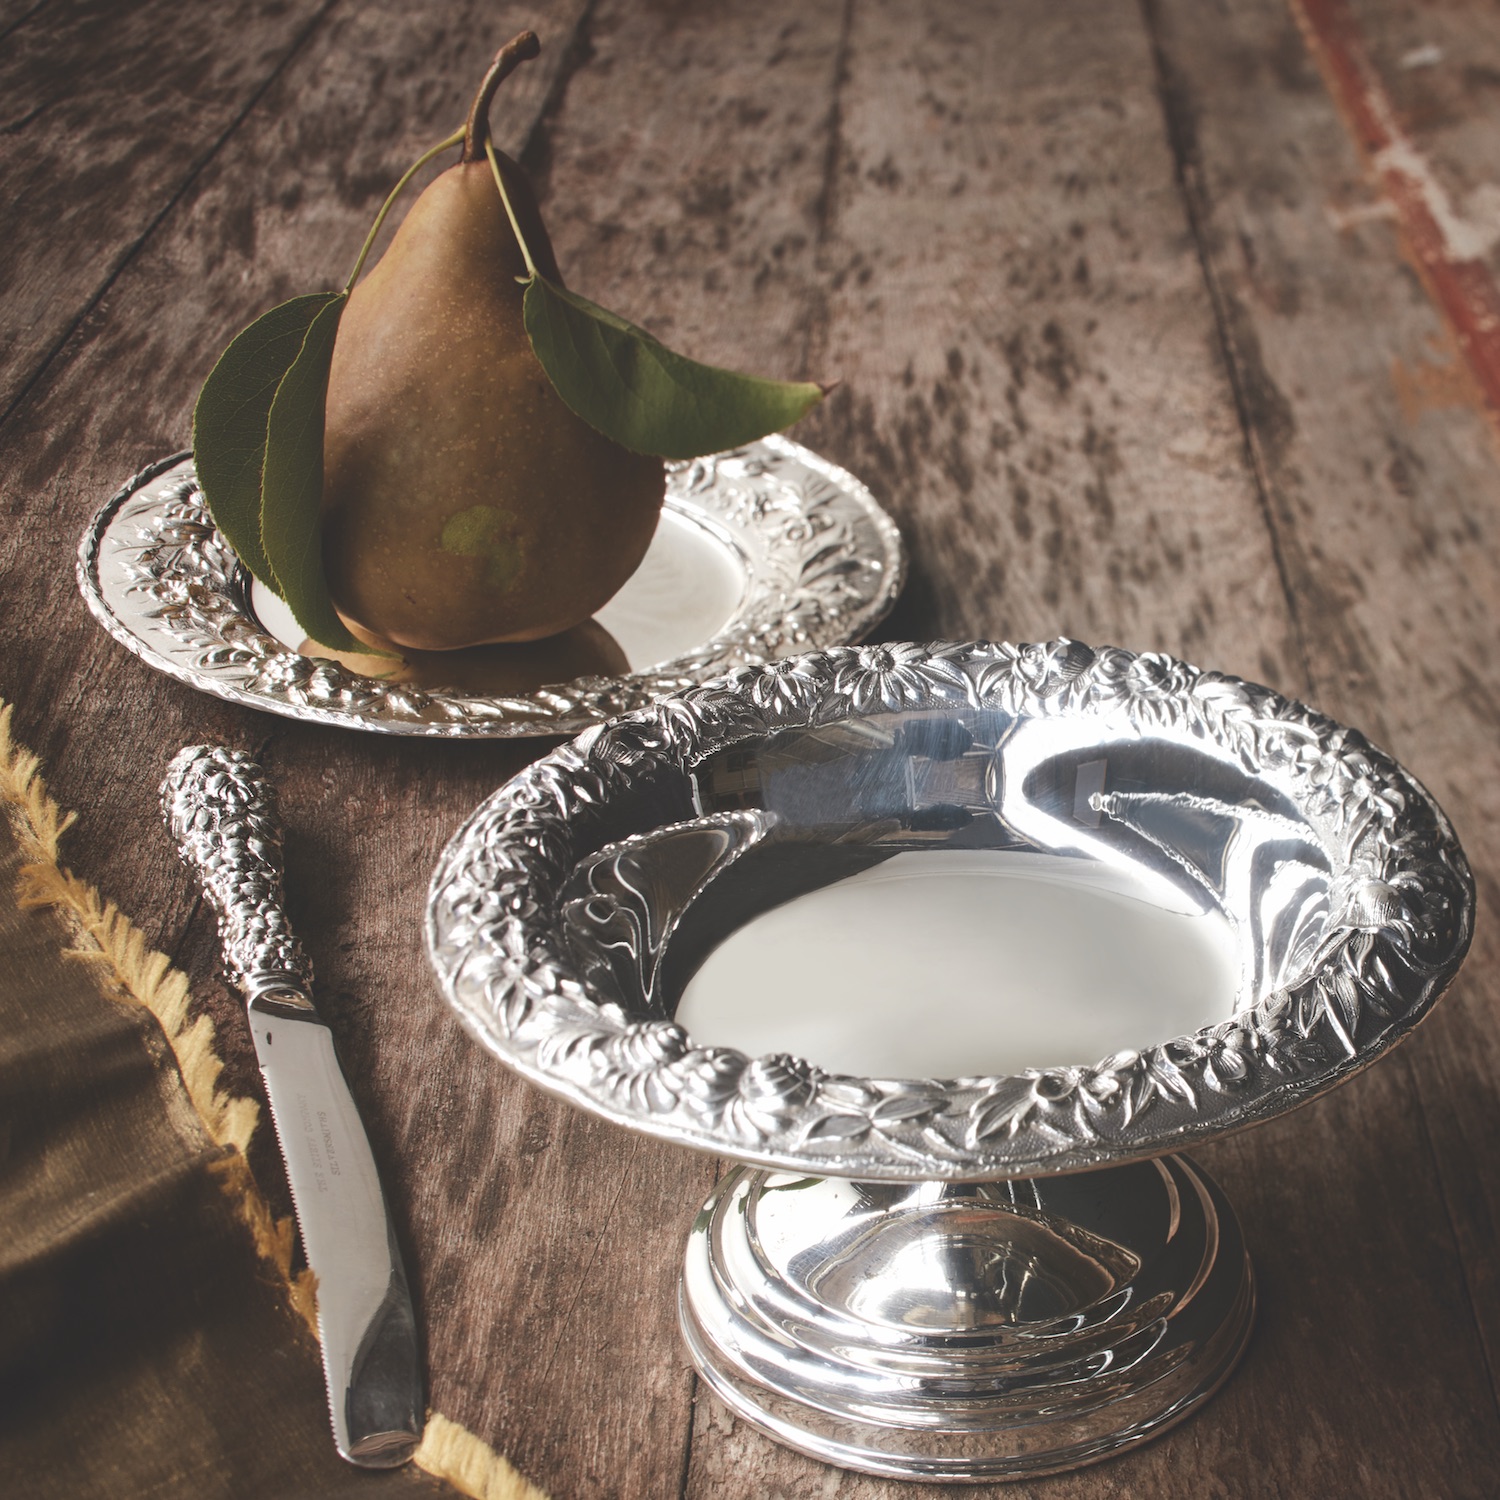 Repoussé silver compote and bread and butter plate (with pear)